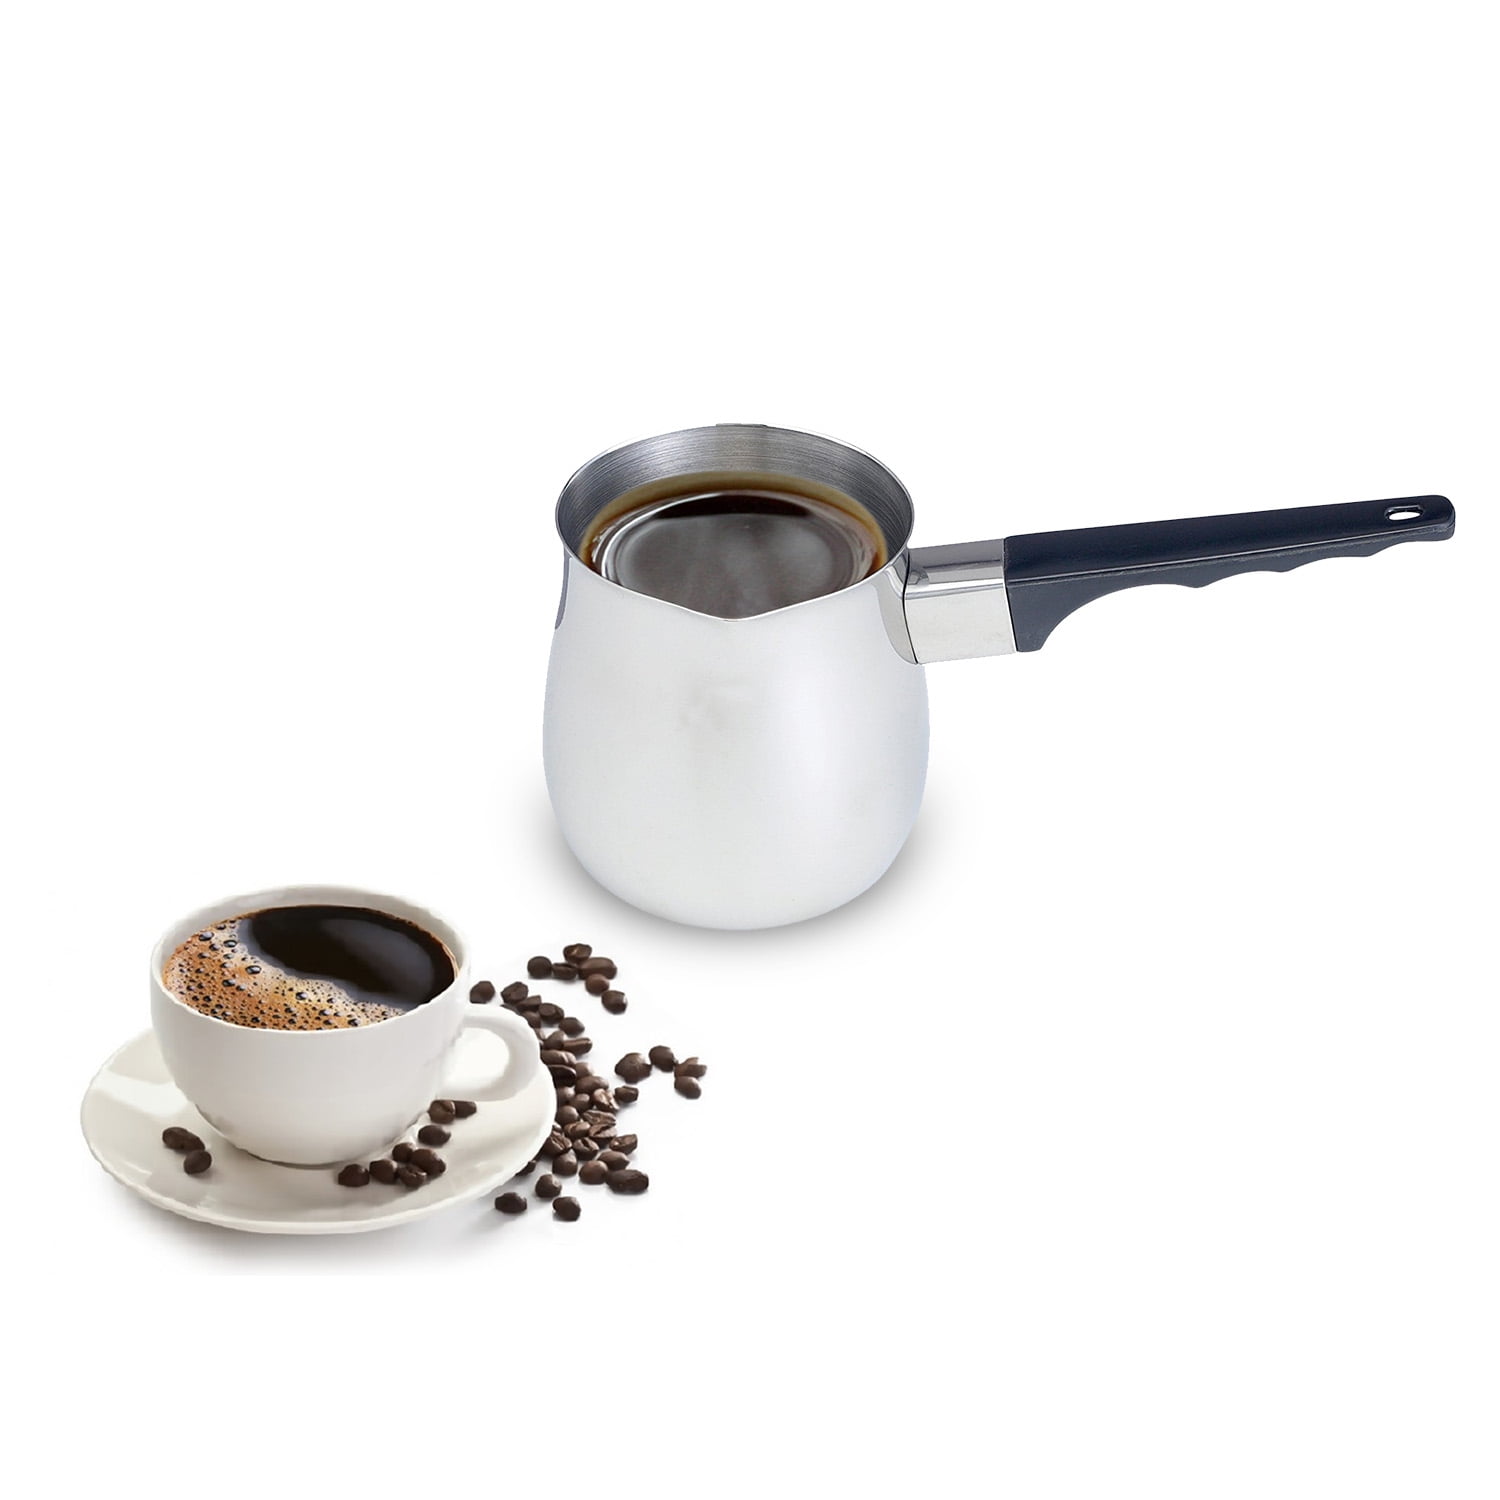 Turkish Coffee Pot, Stainless Steel Milk and Coffee Warmer,  Ibrik Cezve Arabic Briki Coffee Pot, Chocolate and Butter Melting Pot with  Heat Resistant Handle, 20 OZ, 600 ML: Coffee Servers